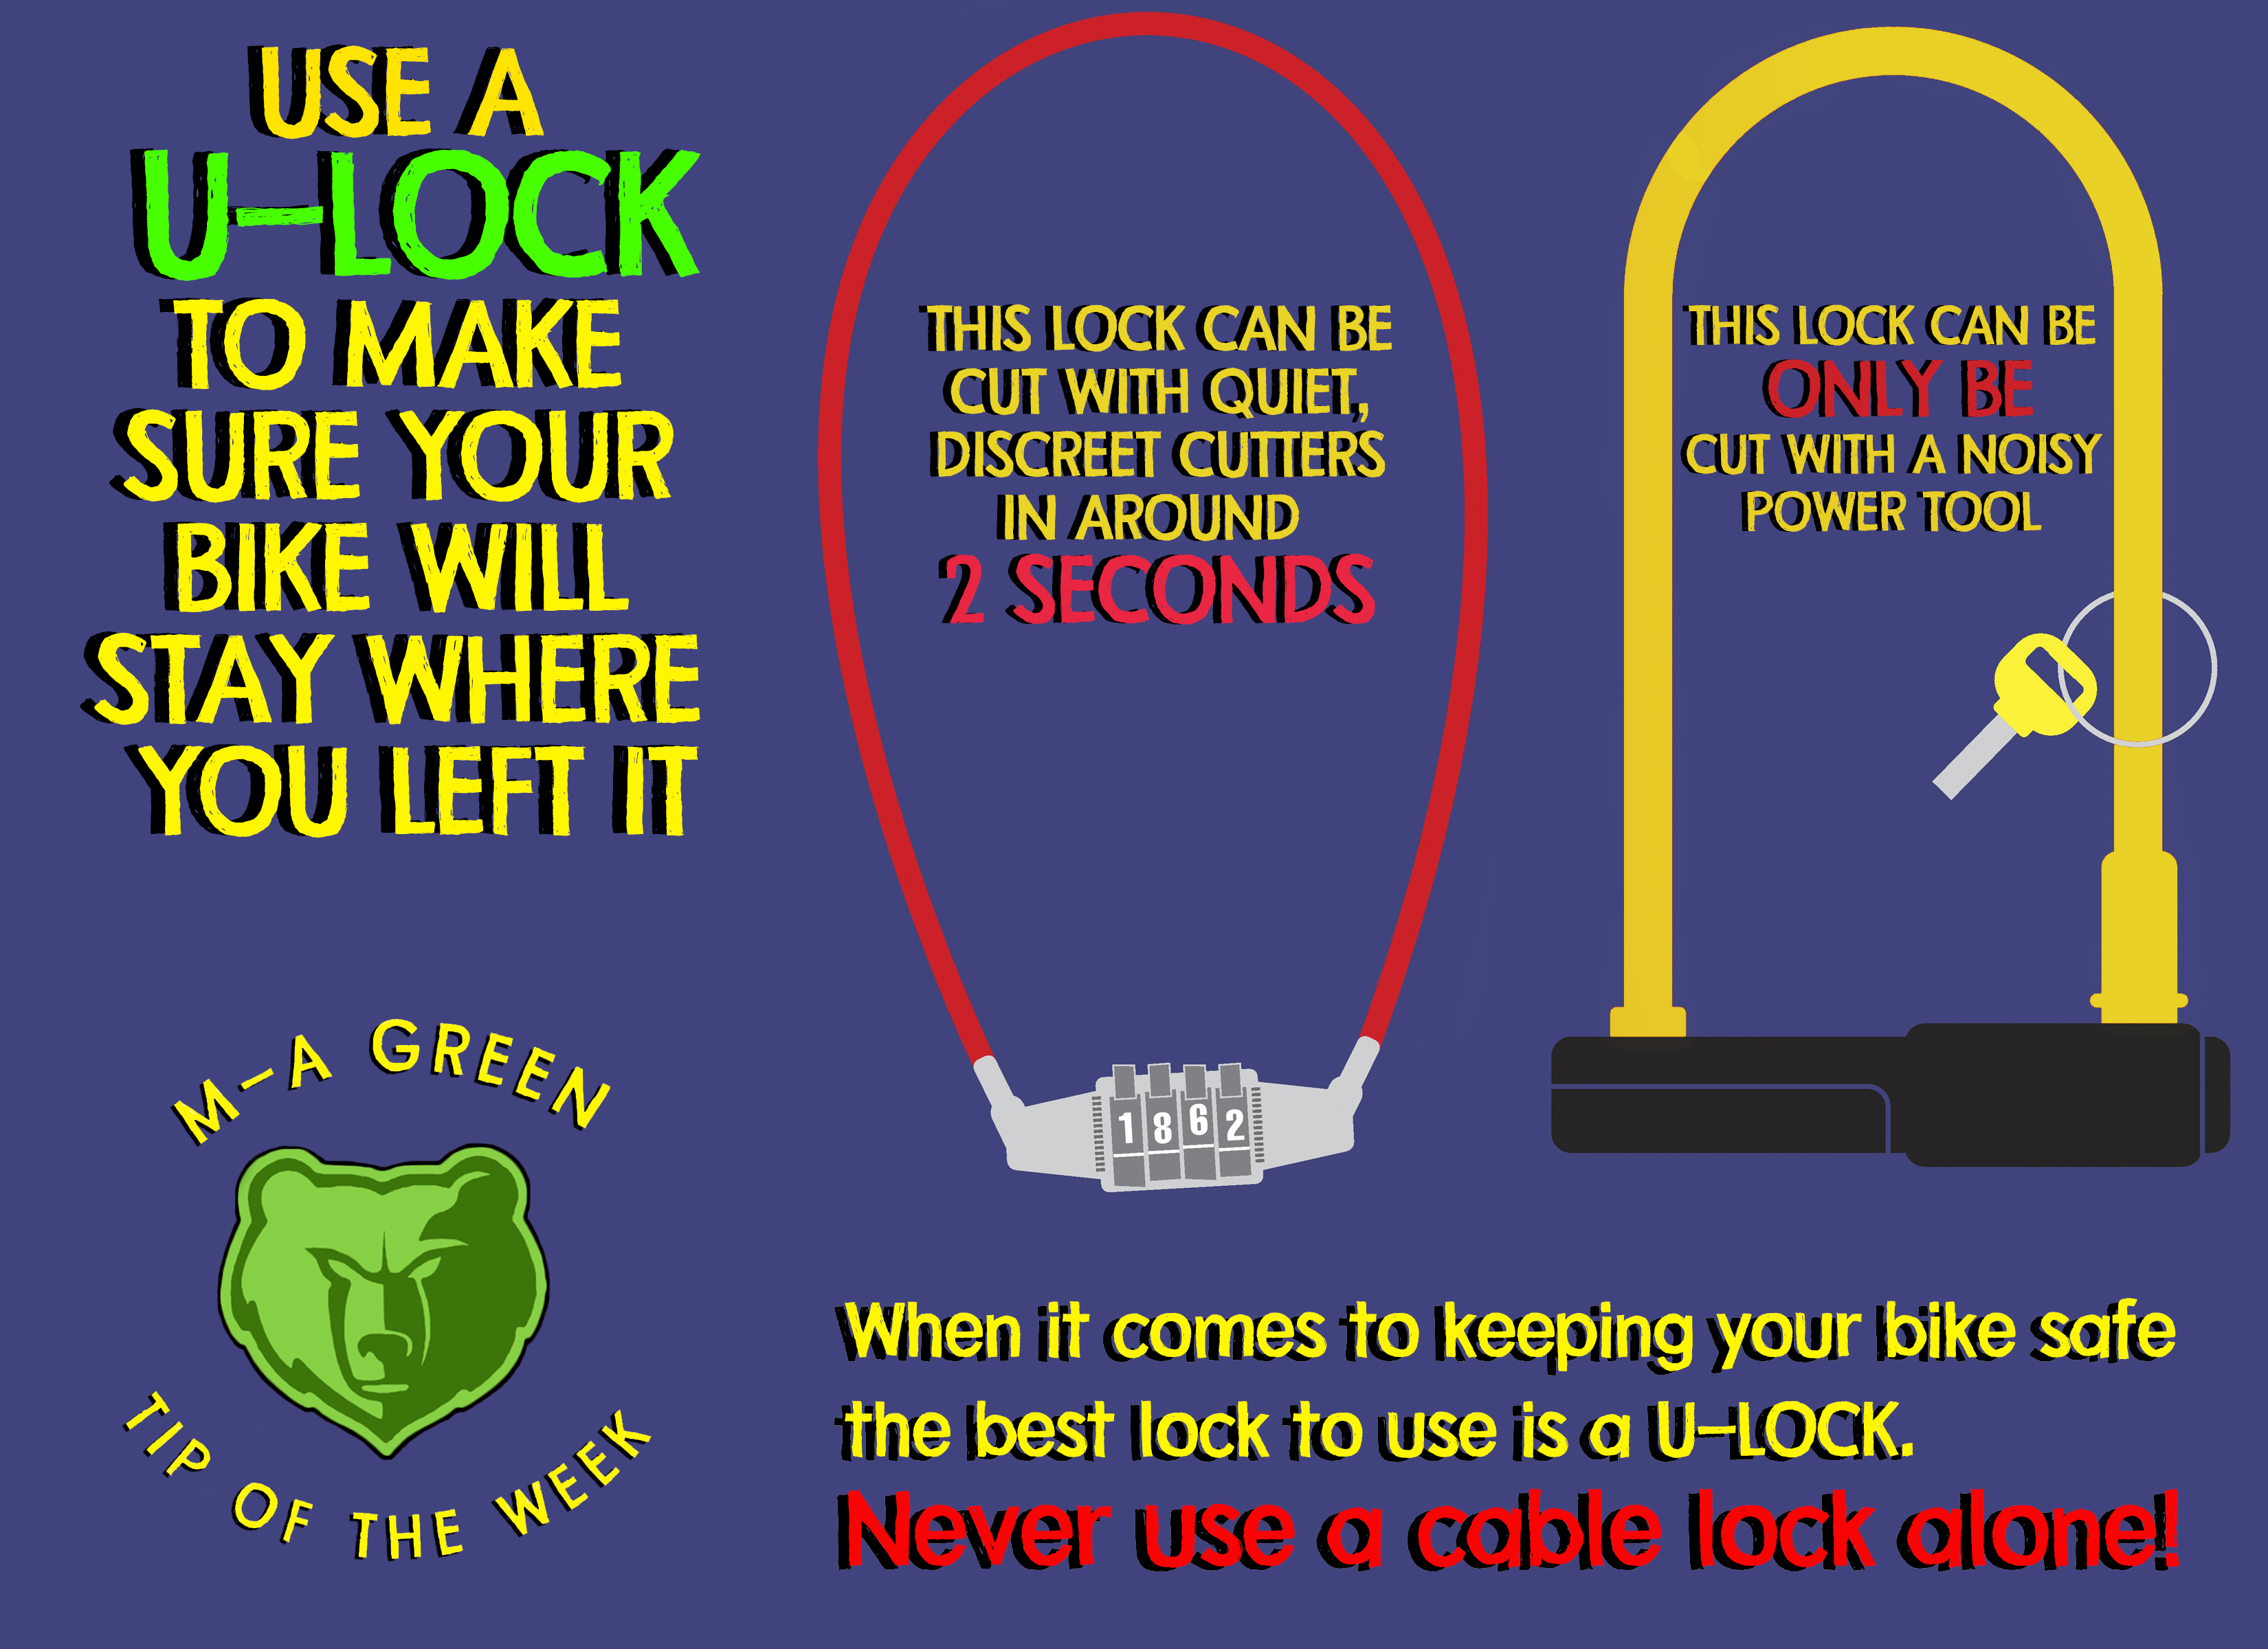 How to Use a U-Lock